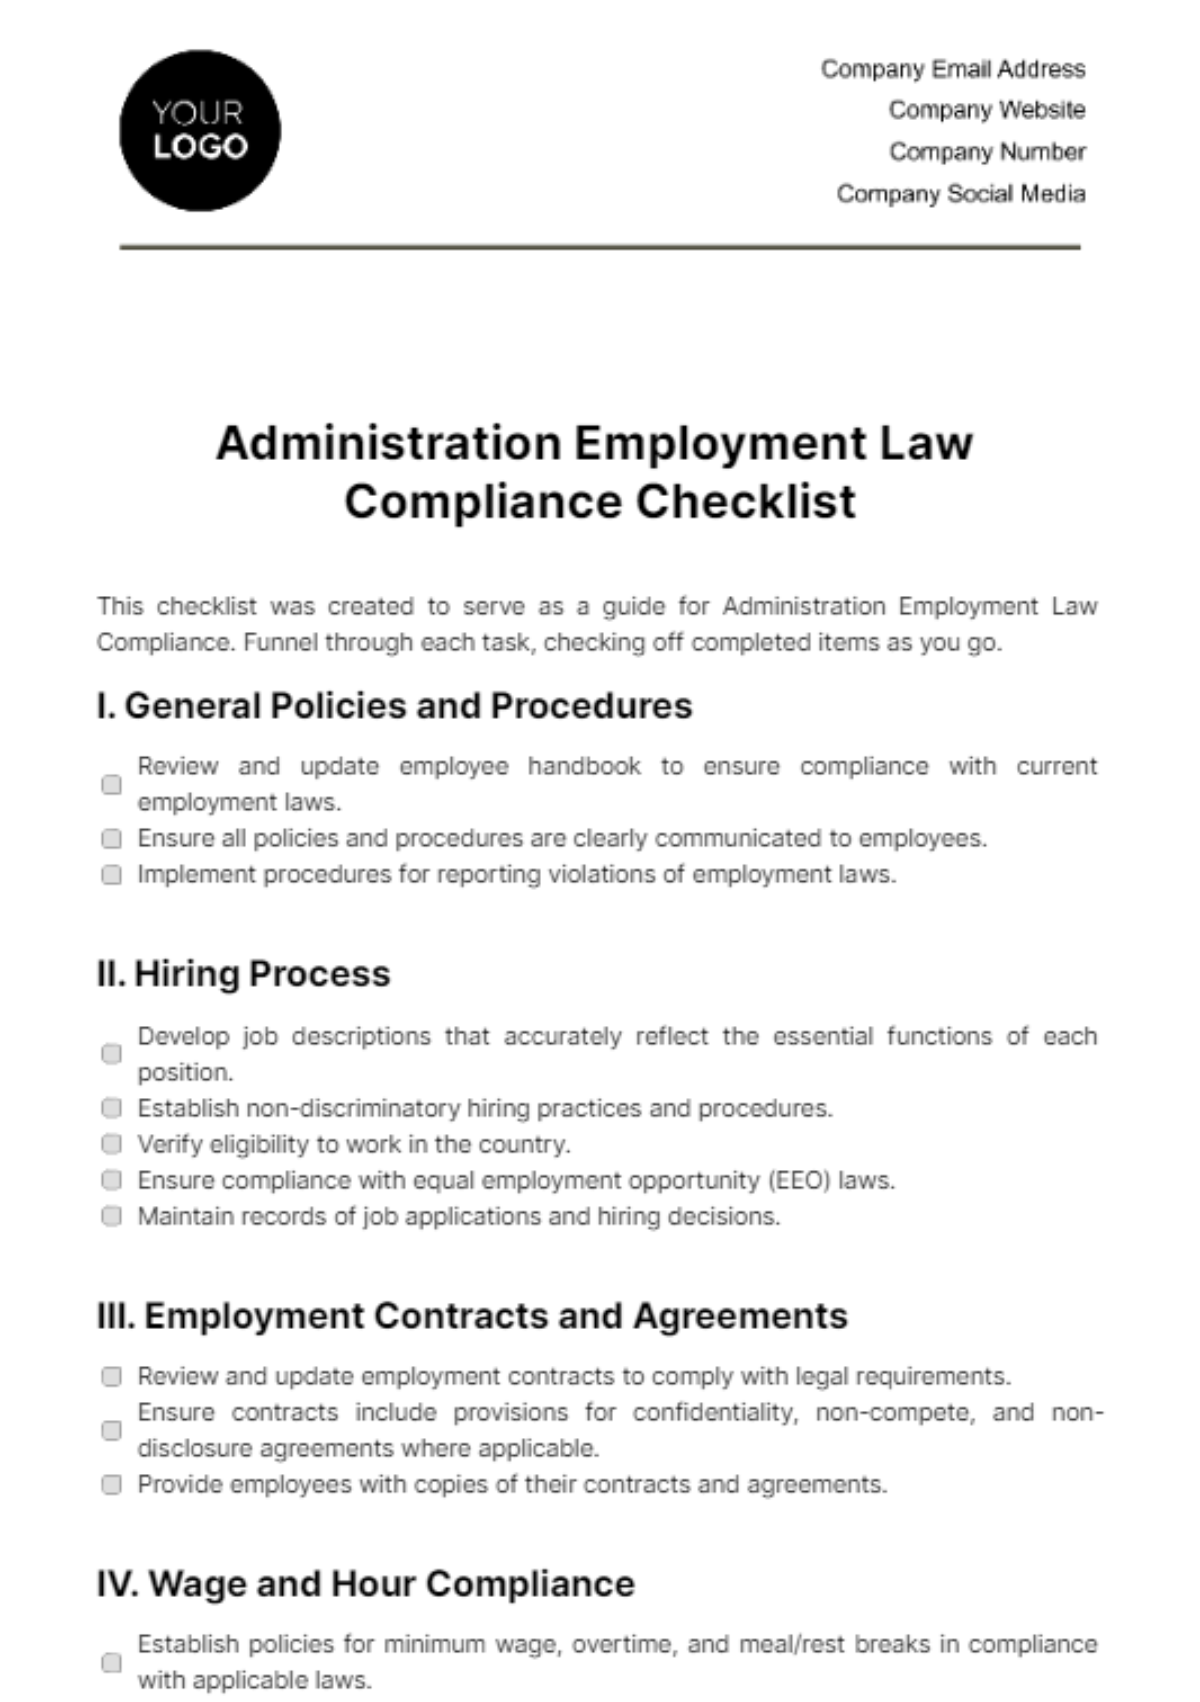 Free Administration Employment Law Compliance Checklist Template